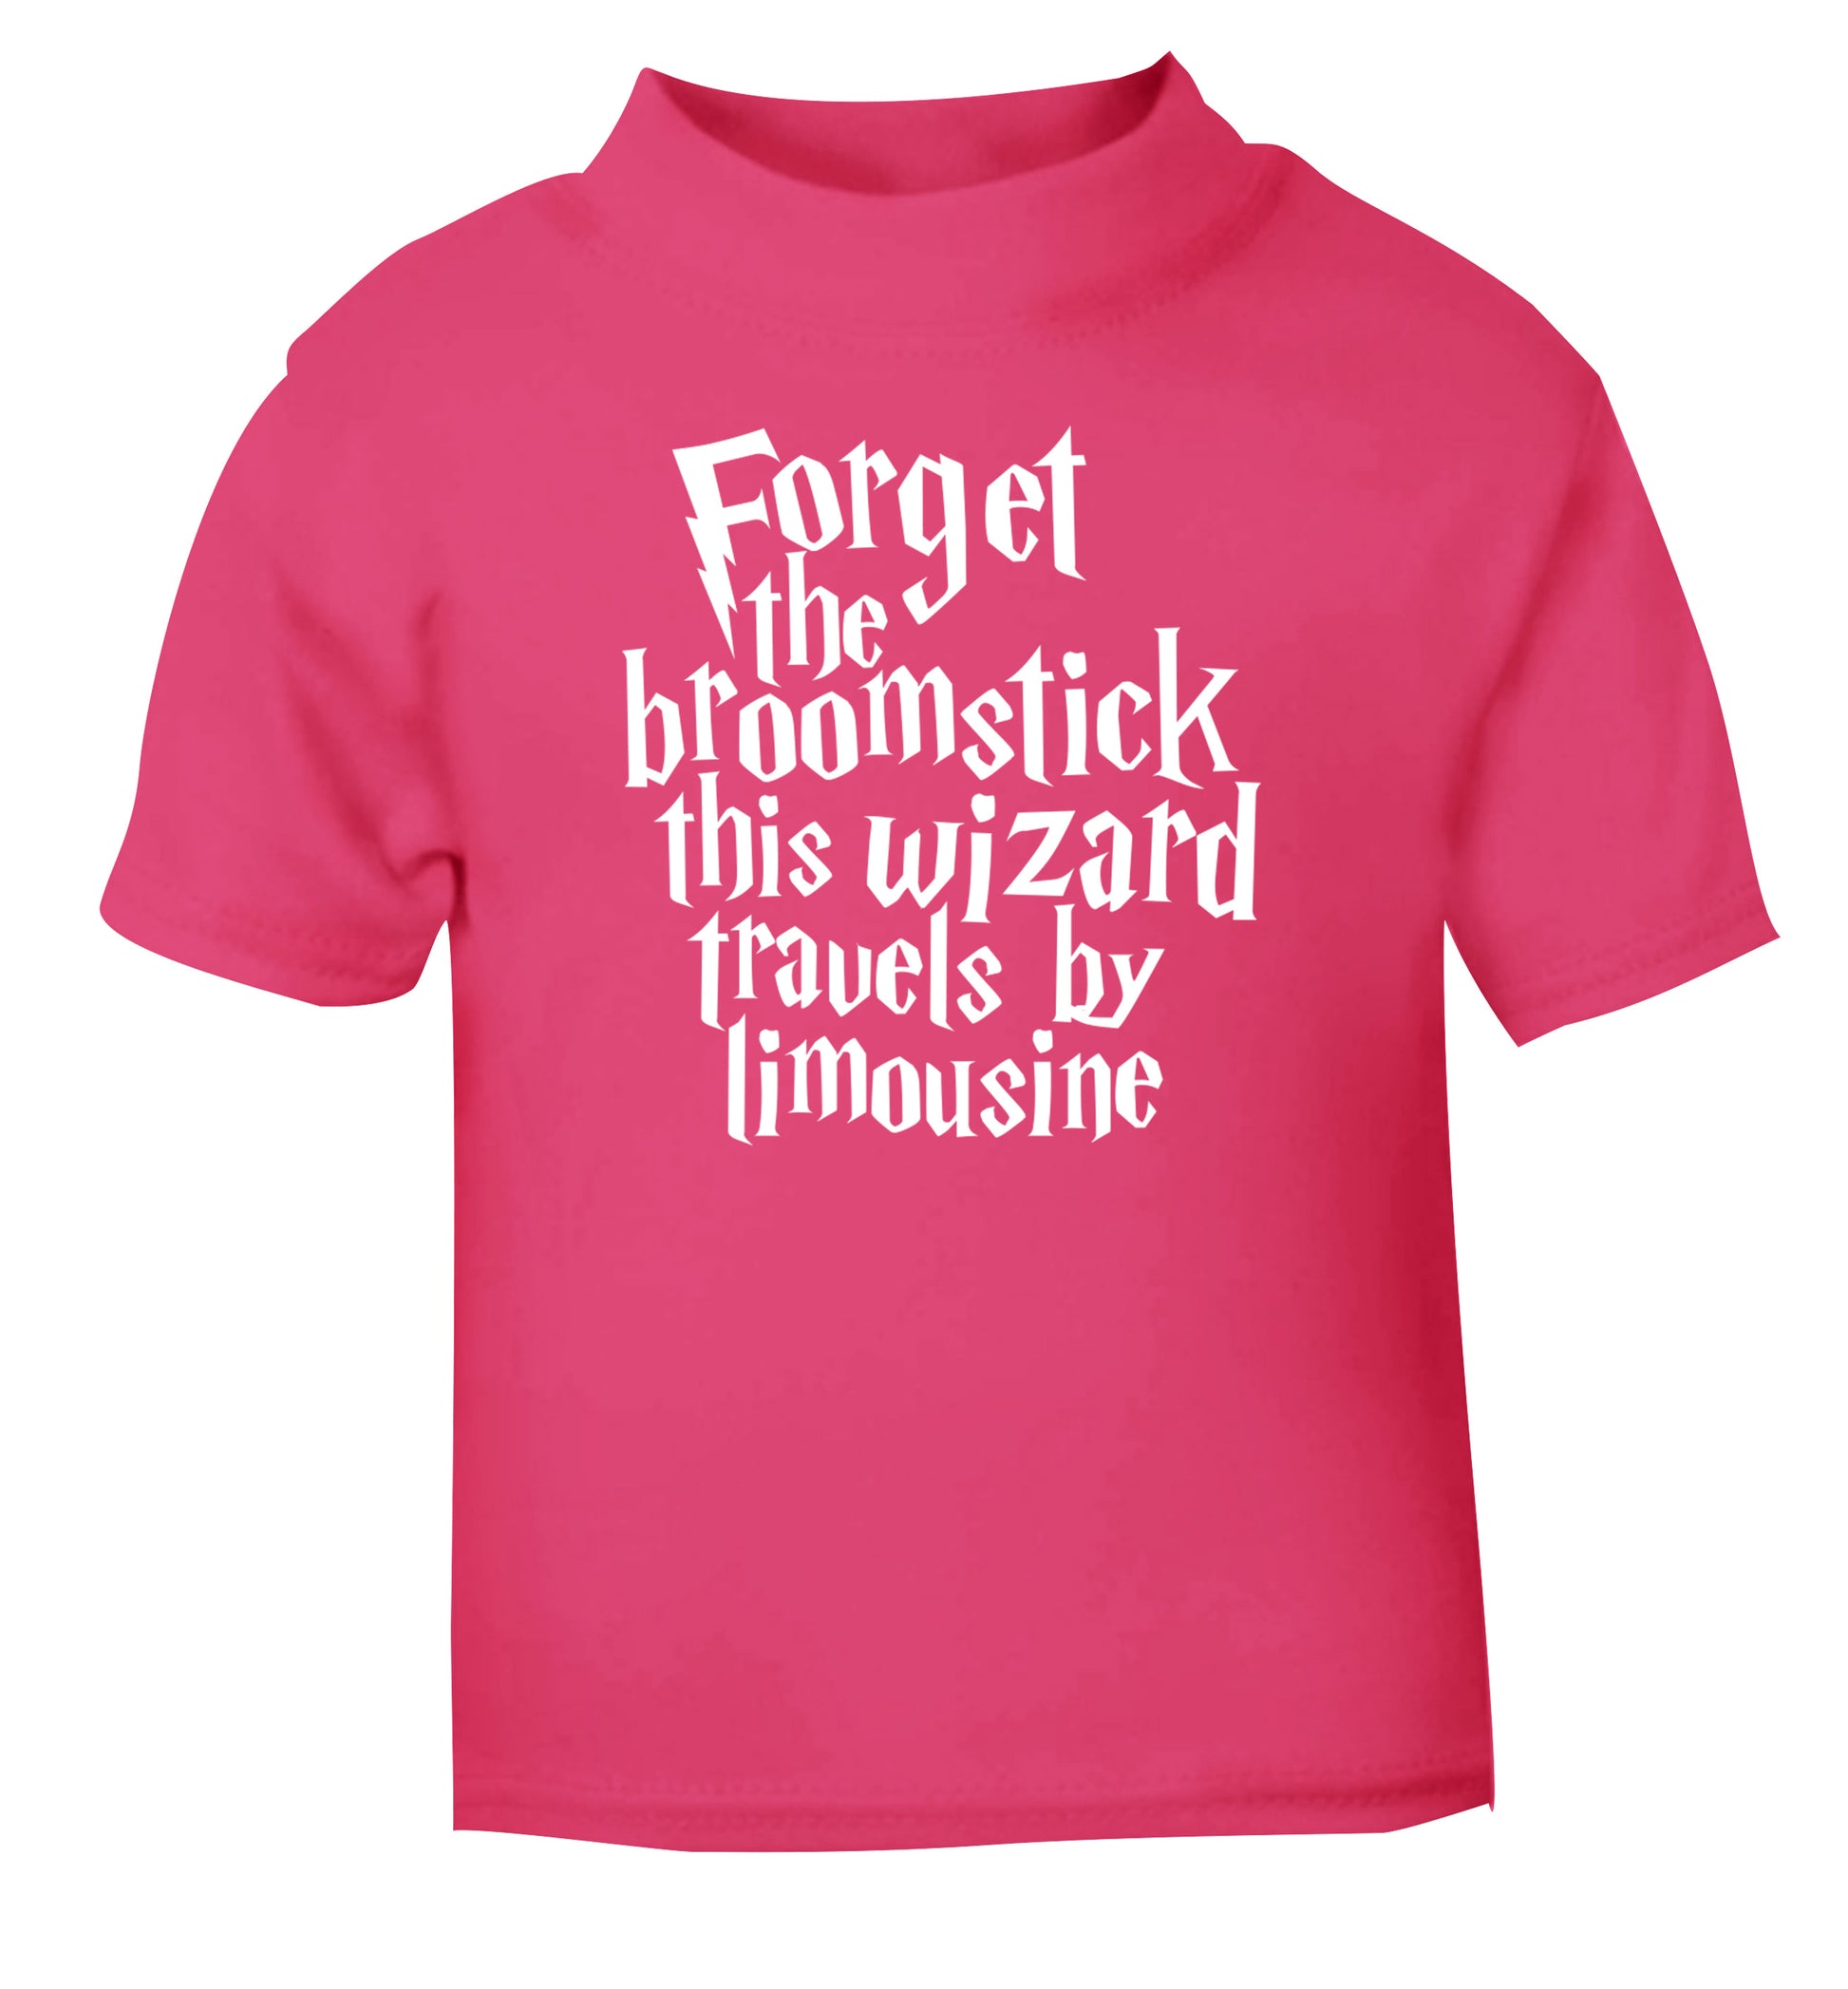 Forget the broomstick this wizard travels by limousine pink Baby Toddler Tshirt 2 Years